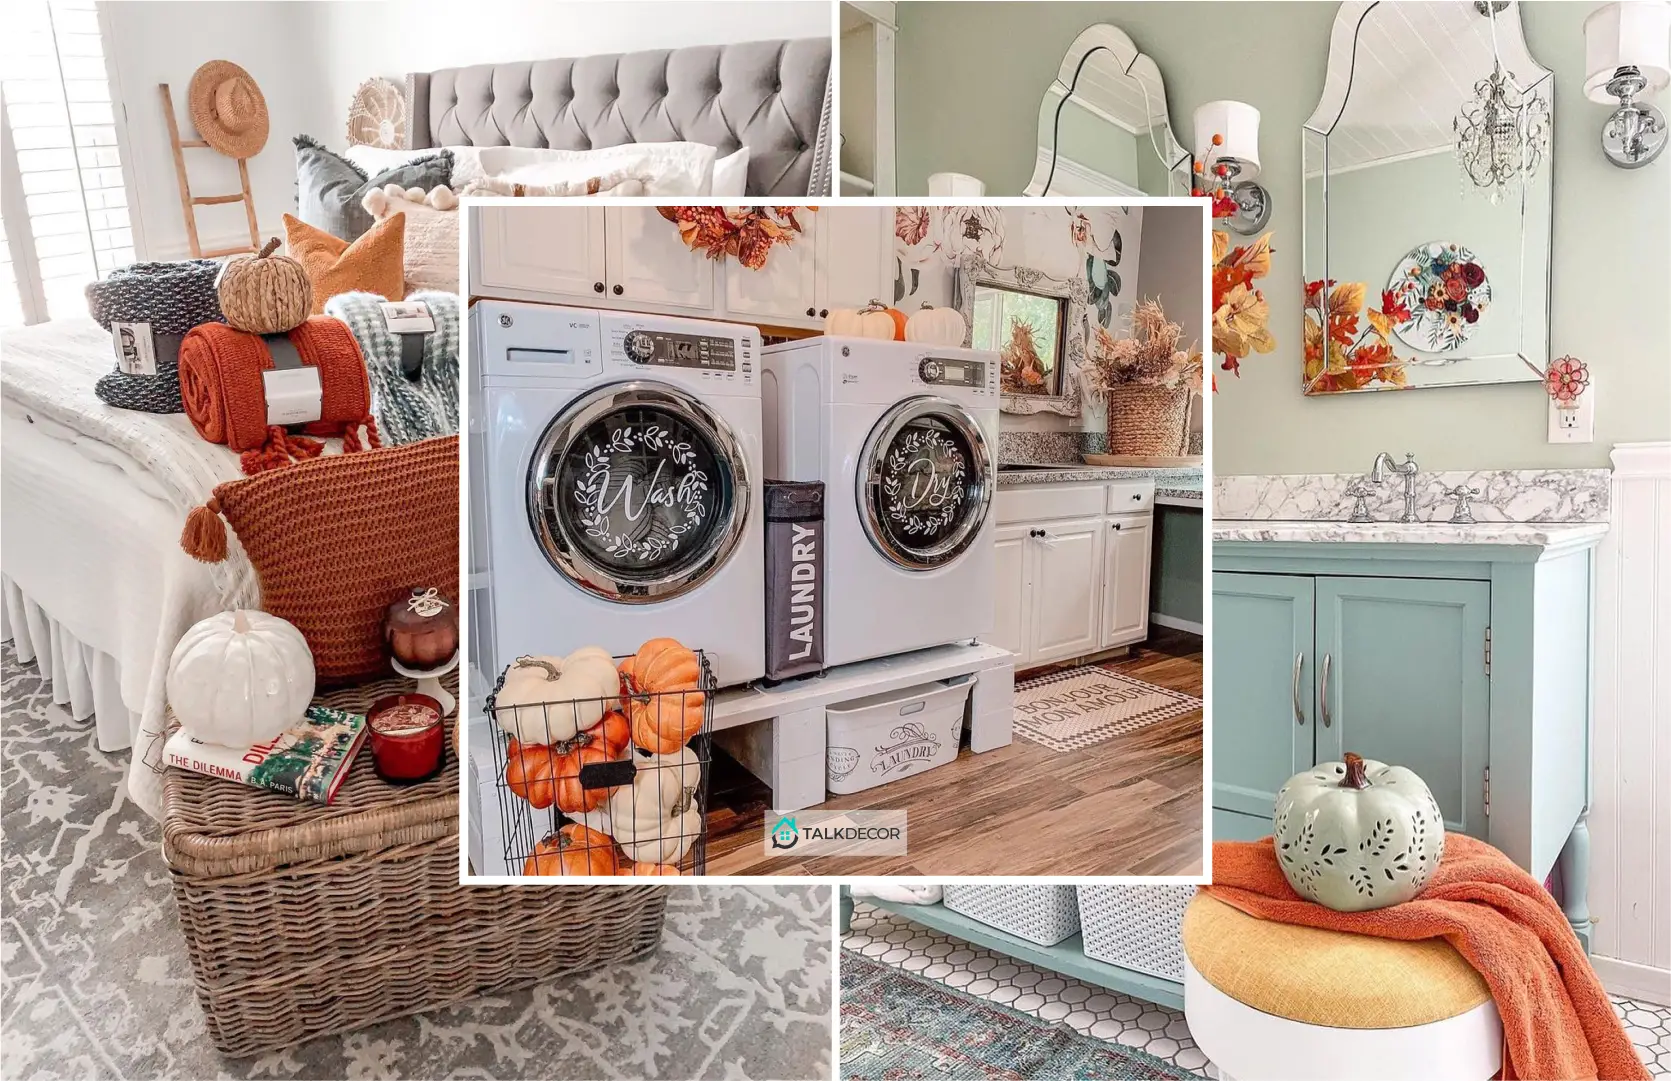 Get the Ideas of Fall Decoration with these 10 Home Tour Projects